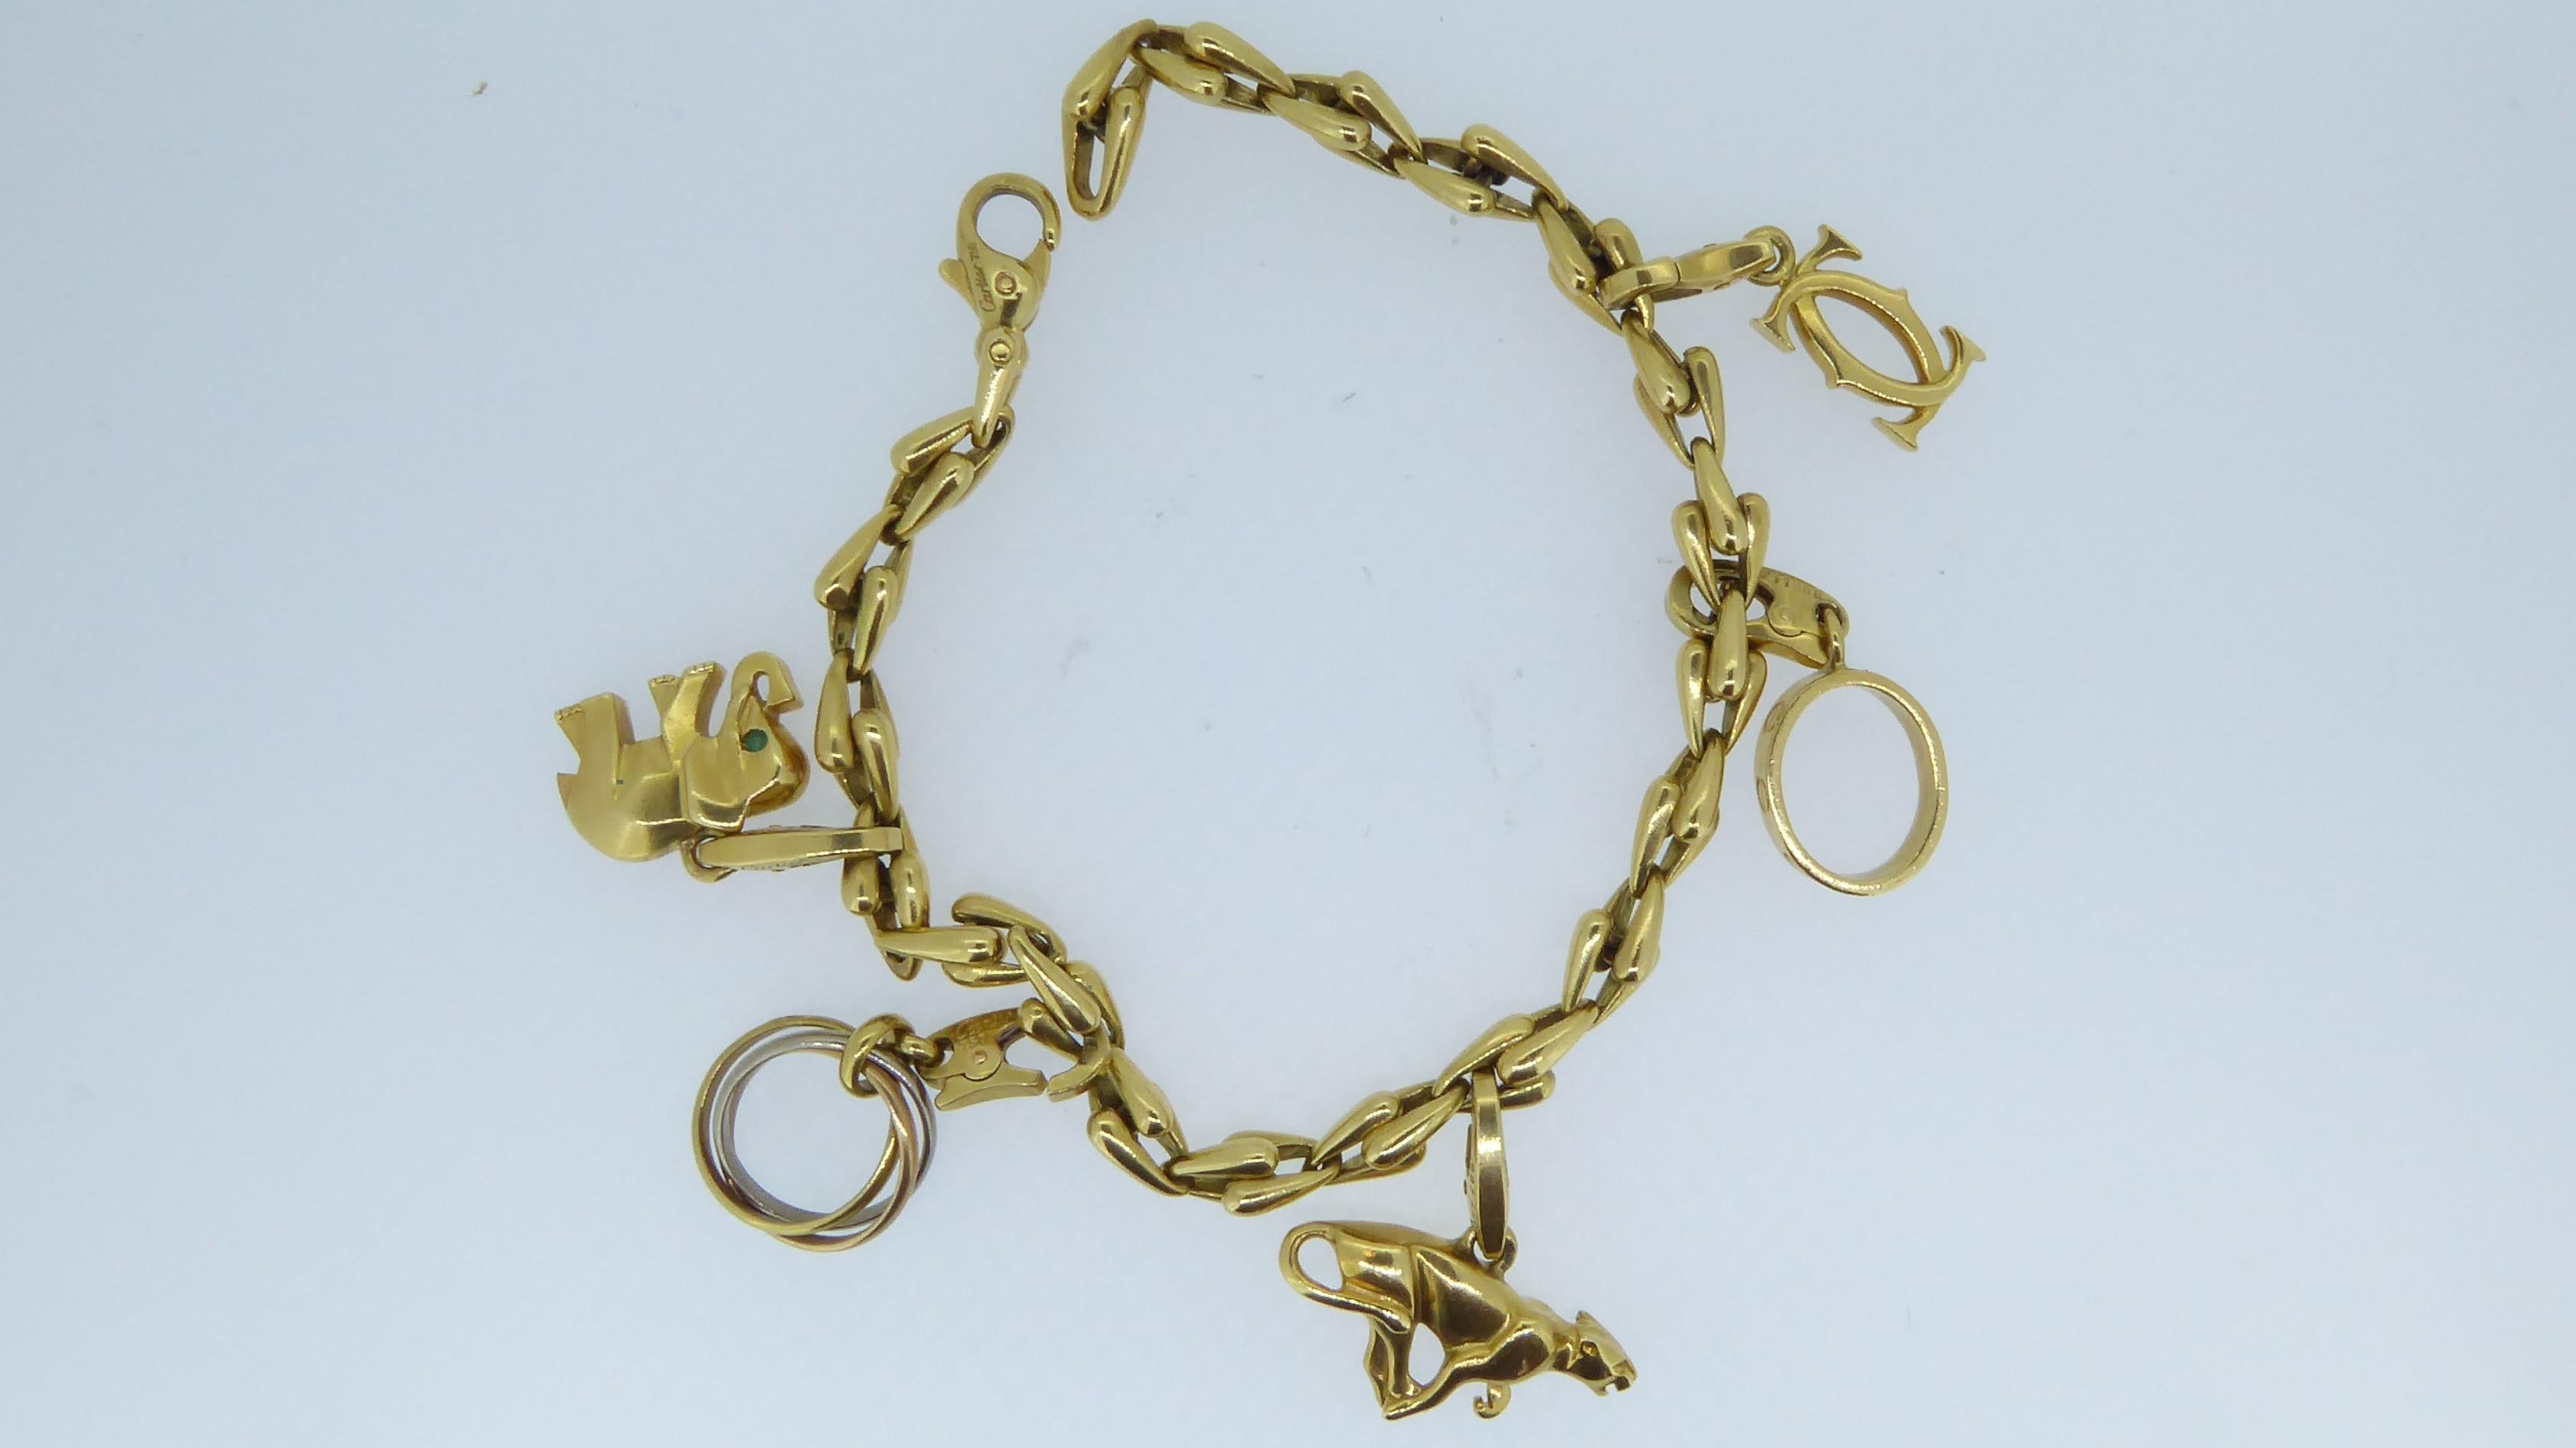 Cartier 18 Carat Yellow Gold 5 Charm Bracelet. Adorned with 5 various charms including an elephant, panther, trinity charm, love charm and the double-C. Each charm signed 